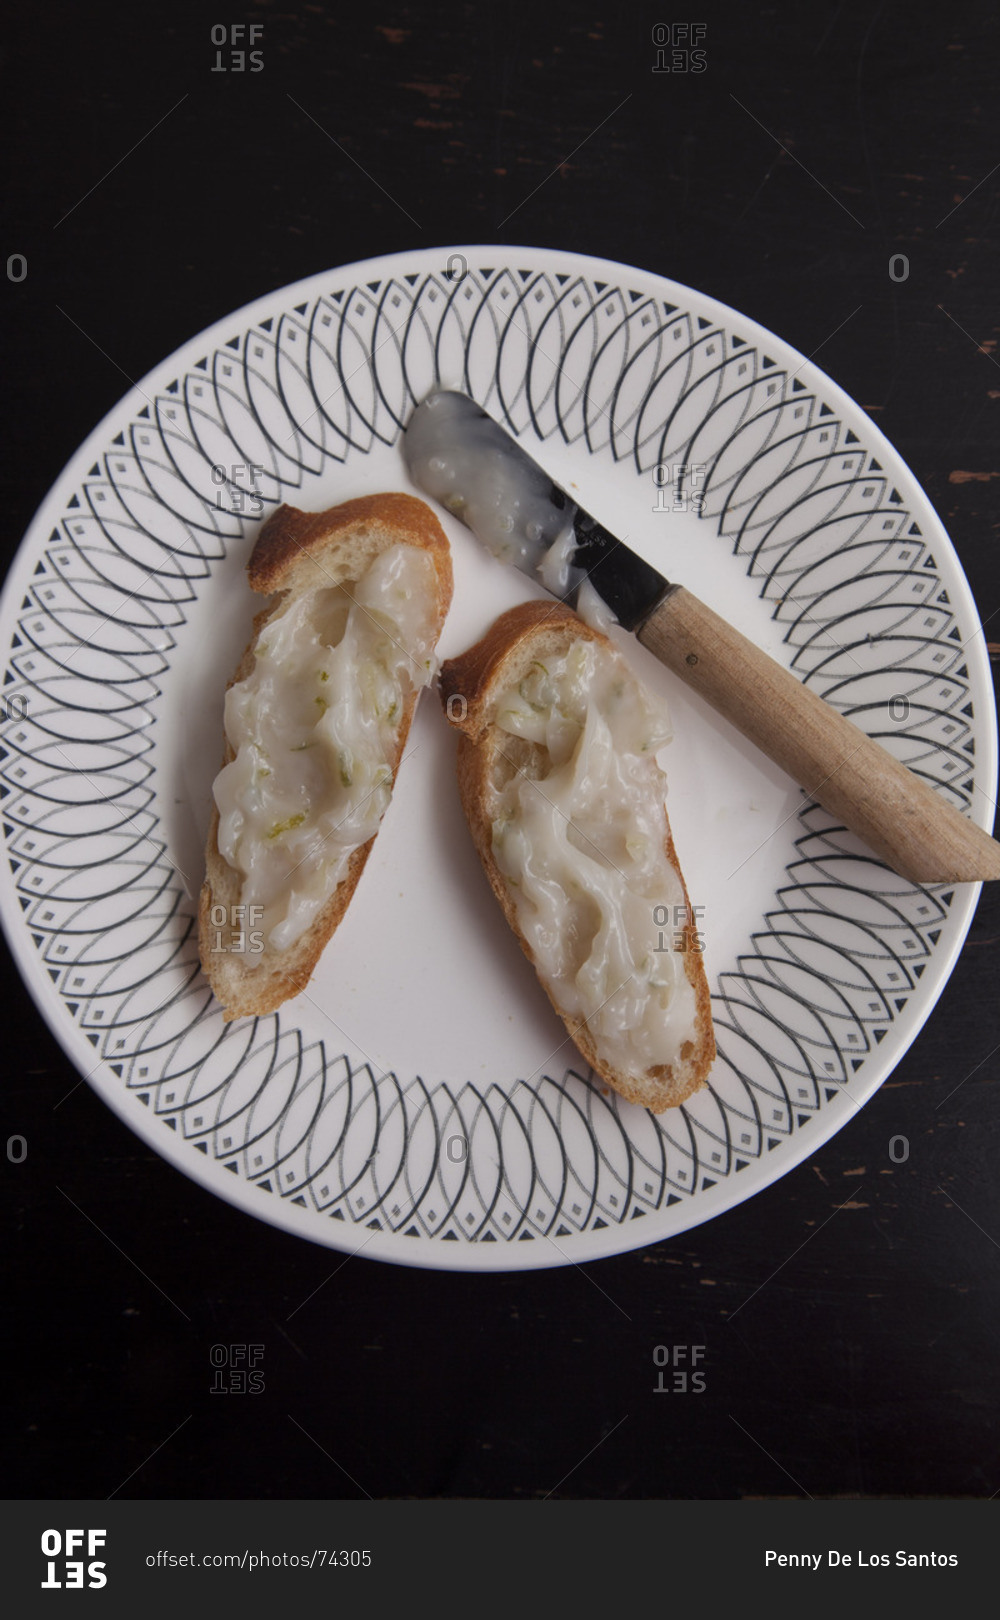 Coconut and lime jam on baguette slices